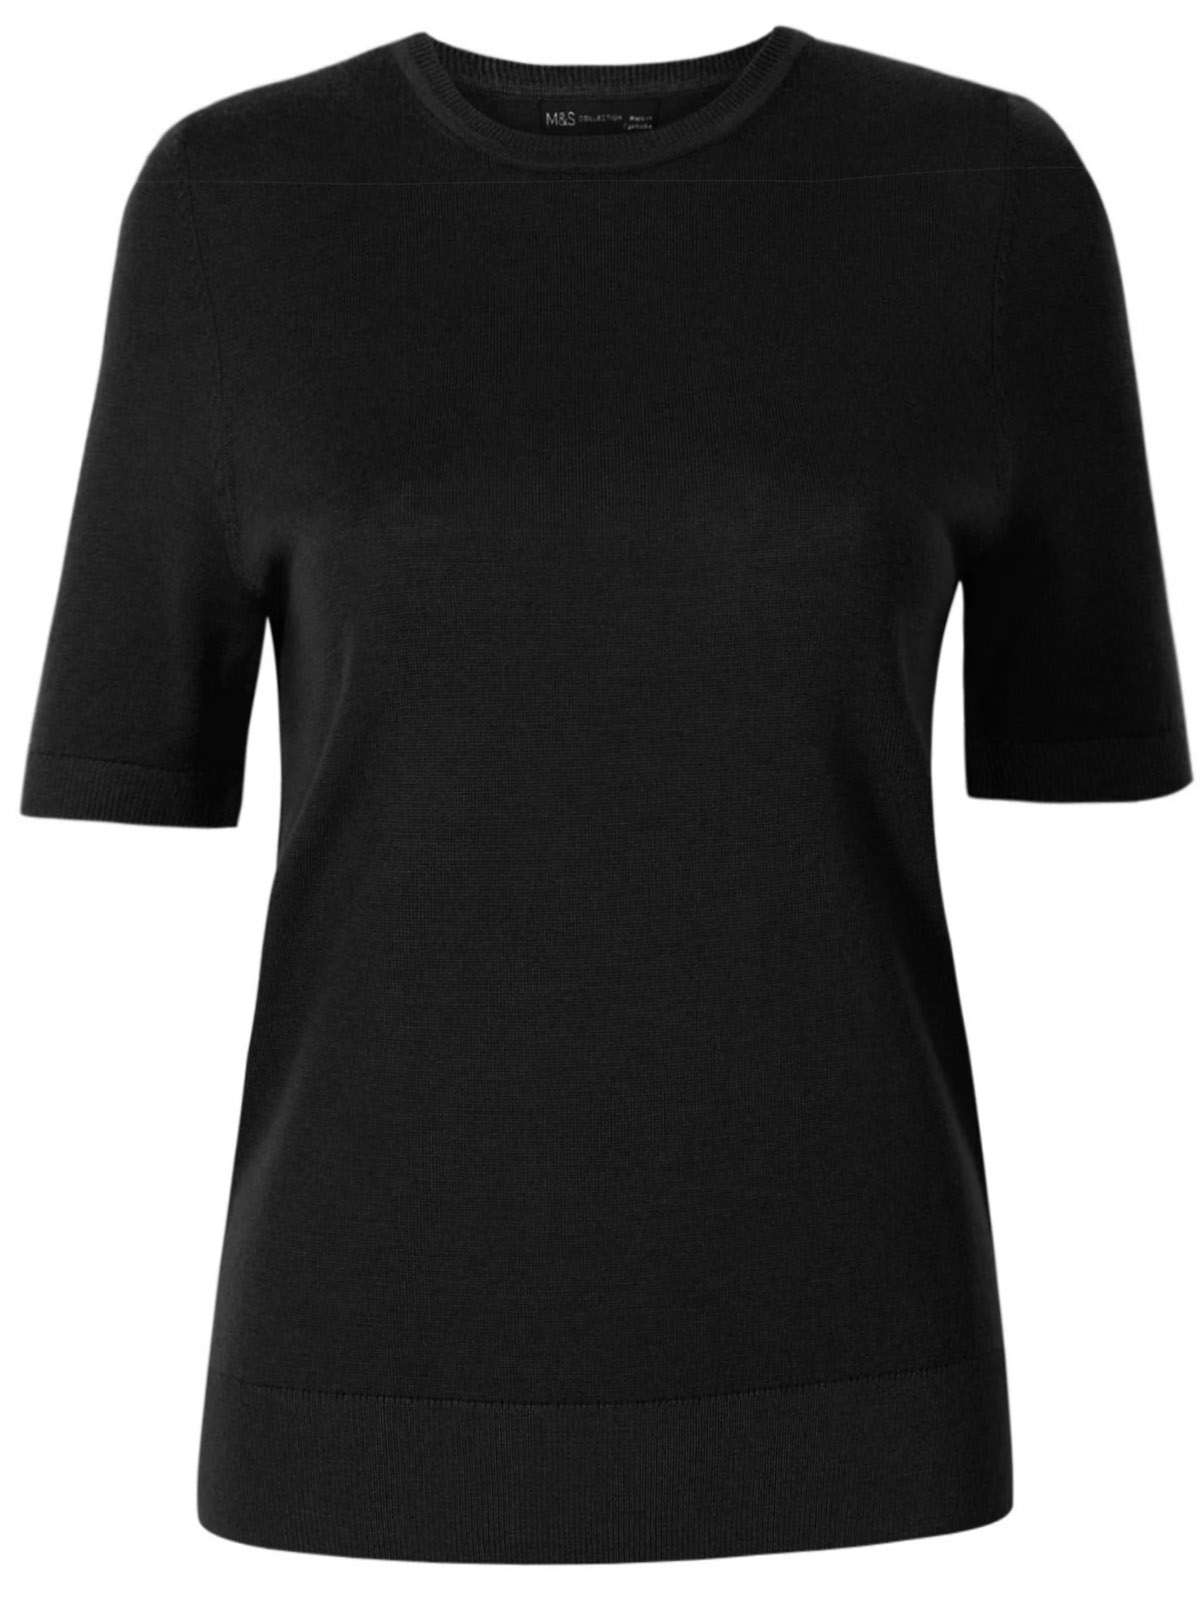 Marks and Spencer - - M&5 BLACK Pure Merino Wool Round Neck Knitted Top ...